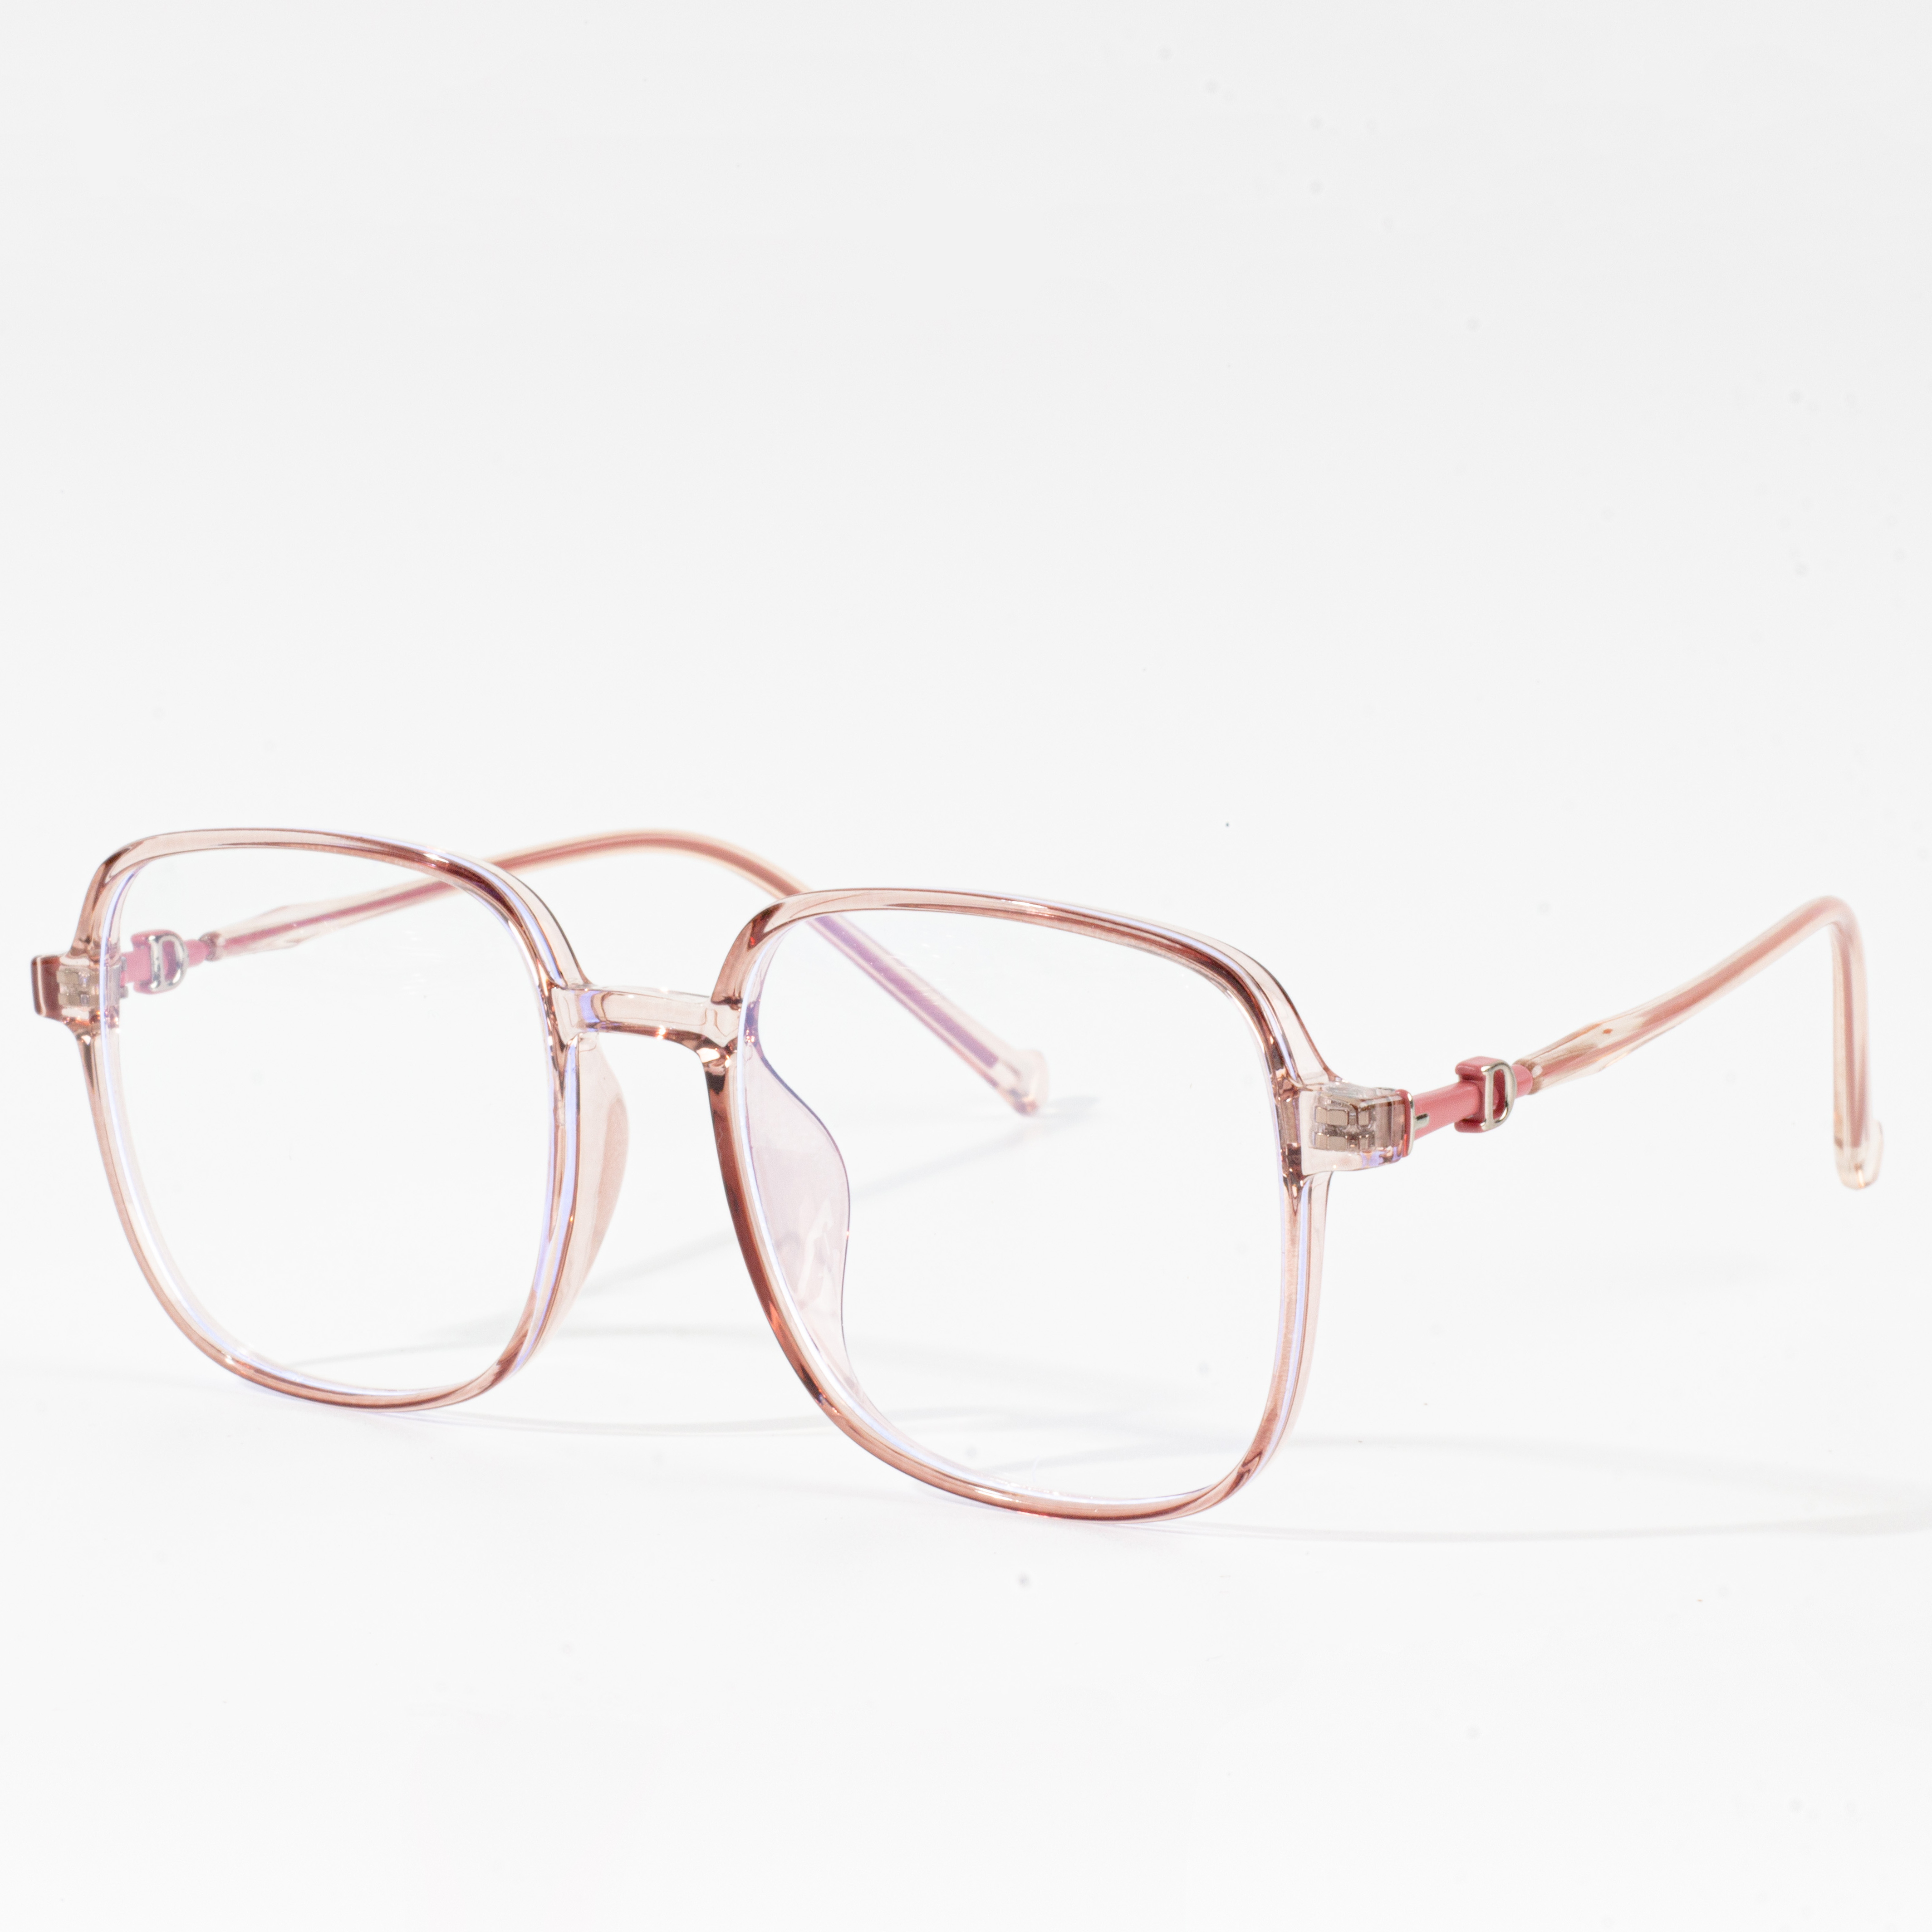 optical frames wholesale suppliers